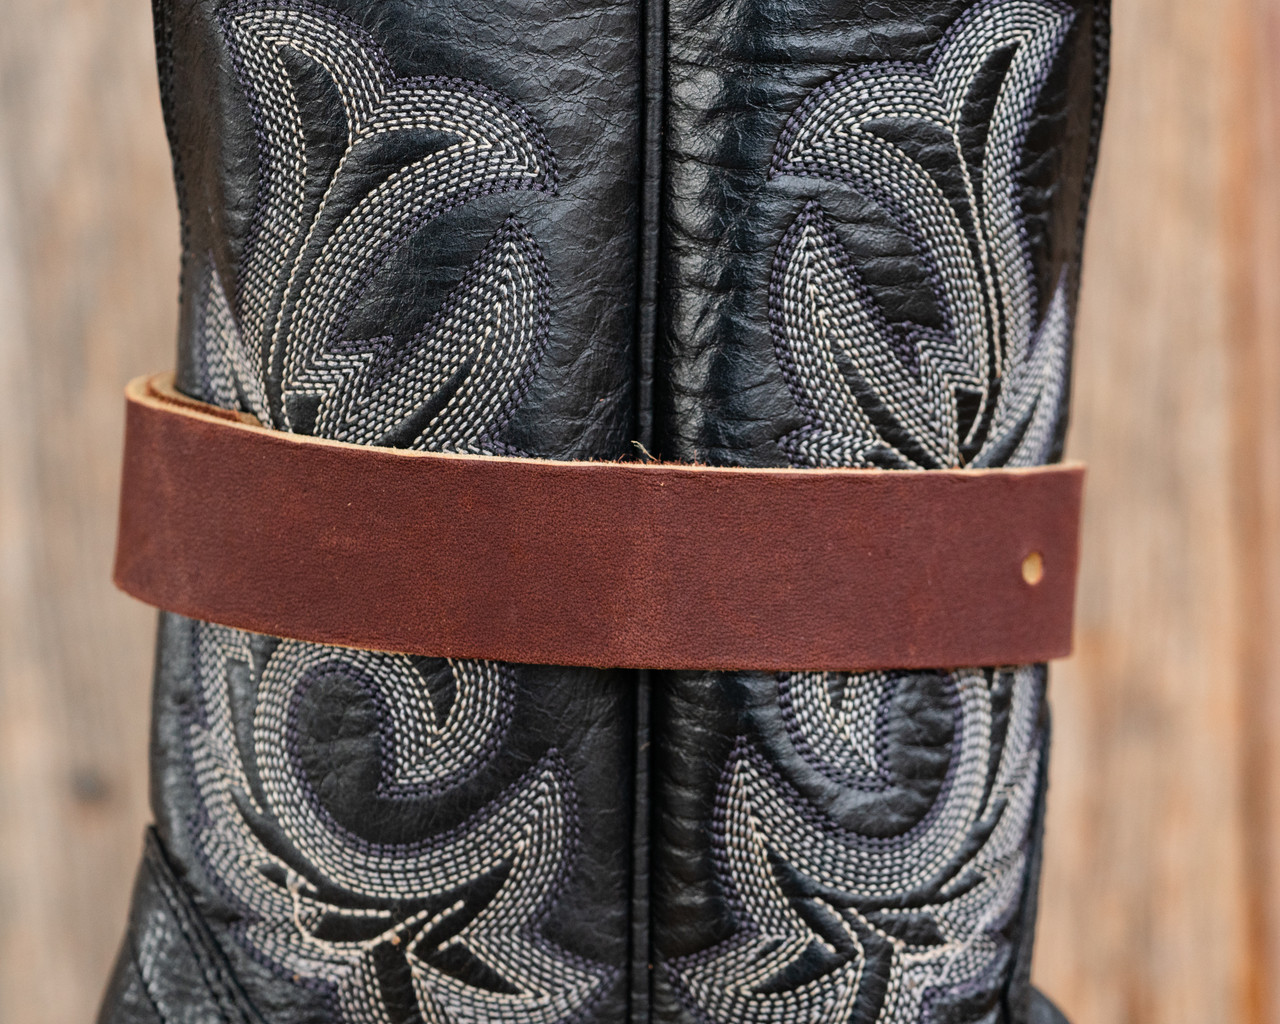 Thoughts on a boot strap for your cowboy boots? I'm kinda torn